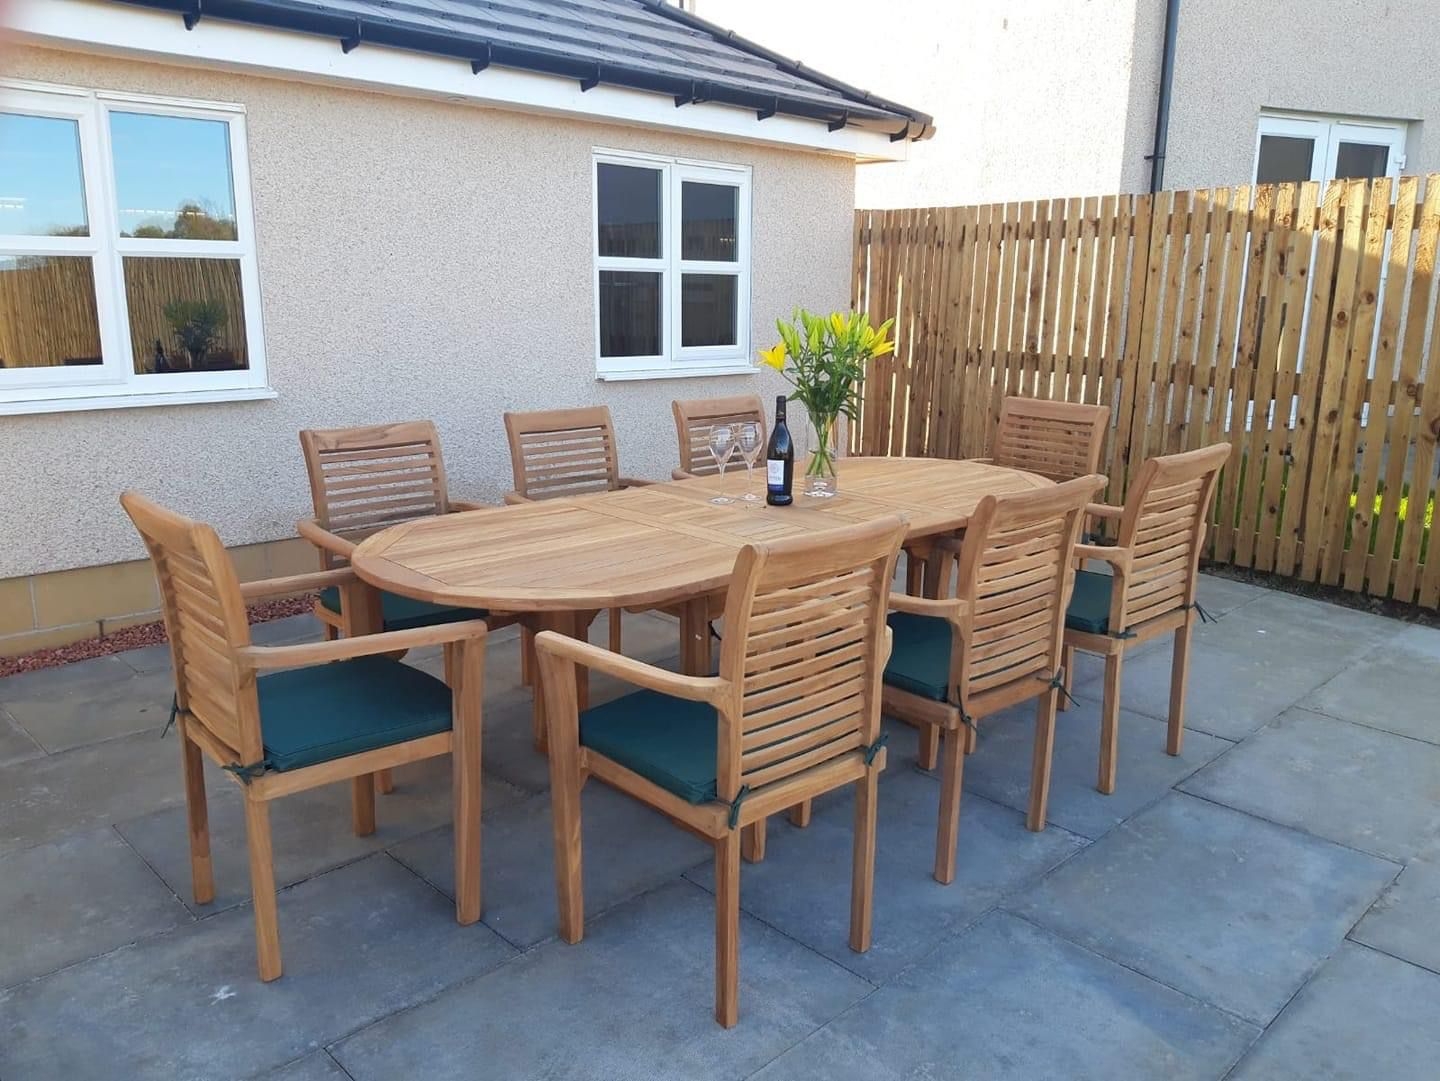 Extending table + 8 chairs – Outdoor Furniture – LMC Trading